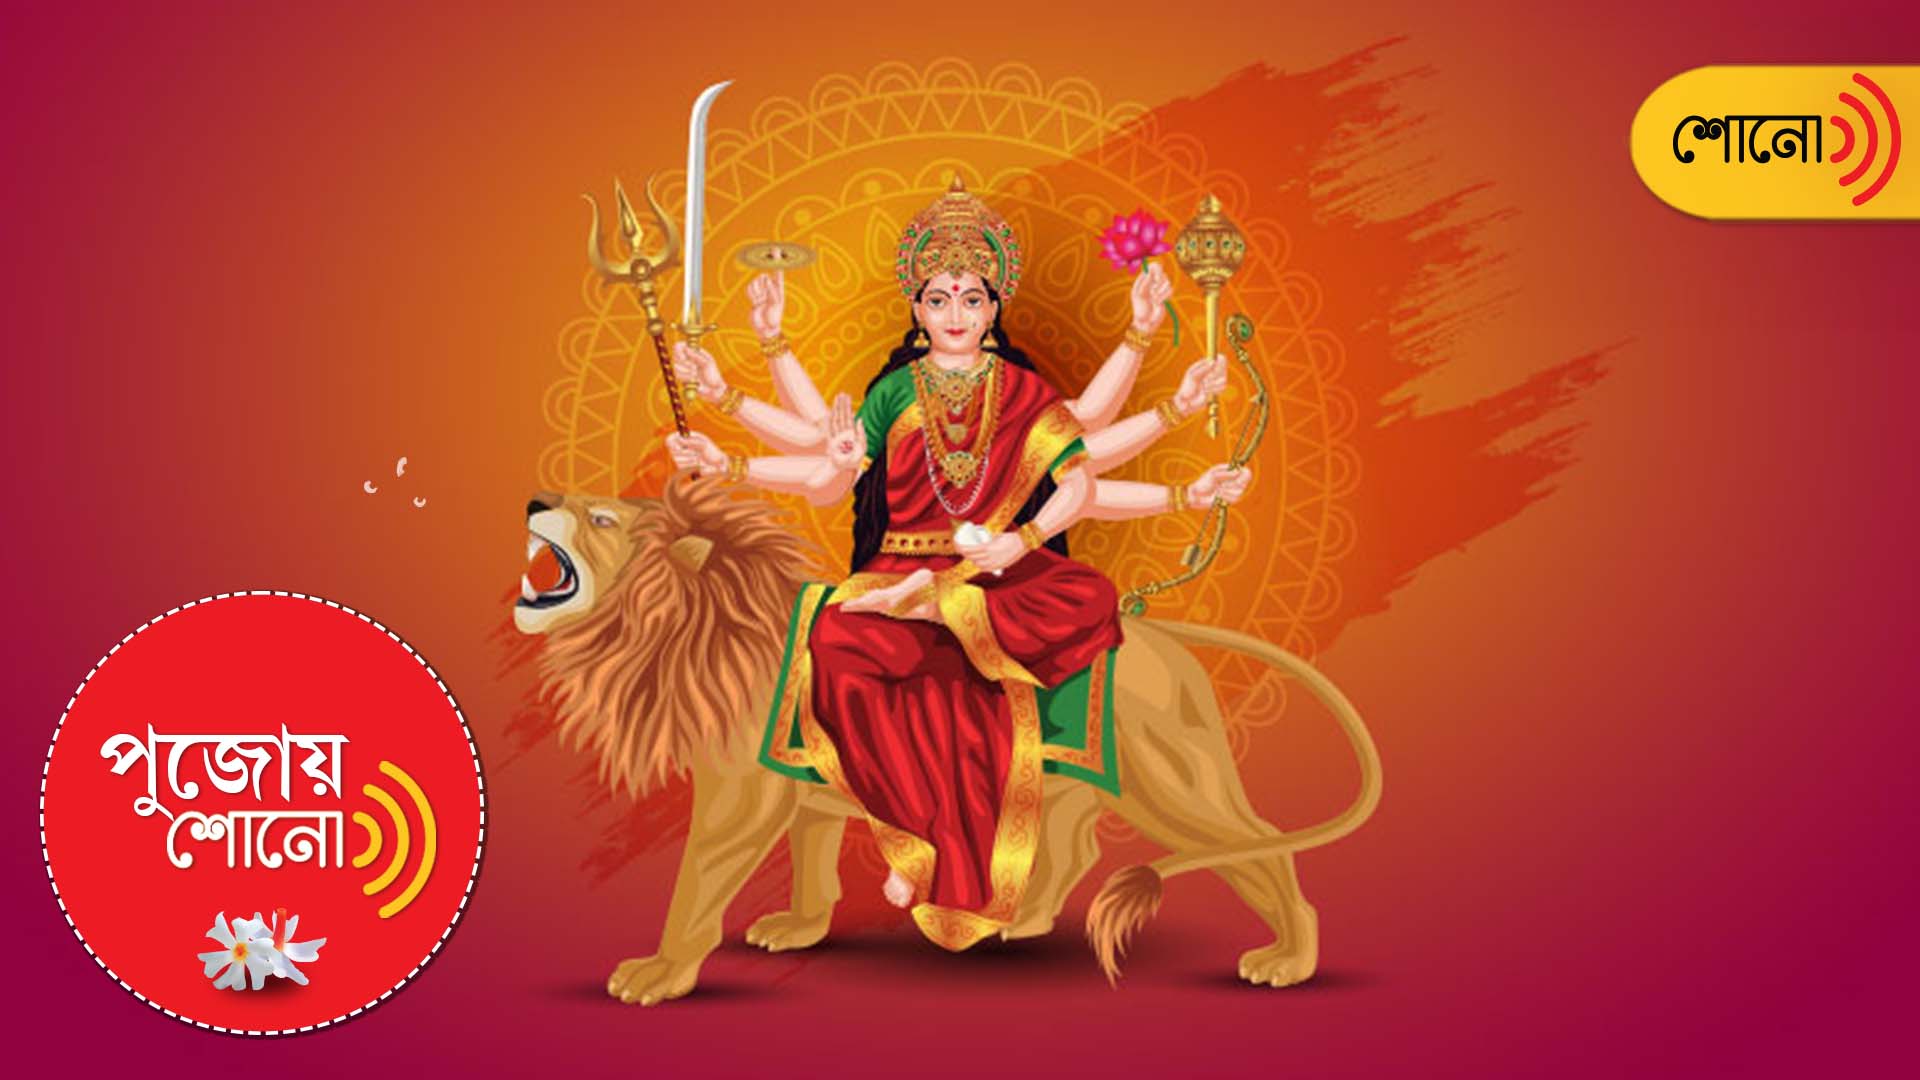 know more about the significance of Navaratri and 9 special avatar of Durga